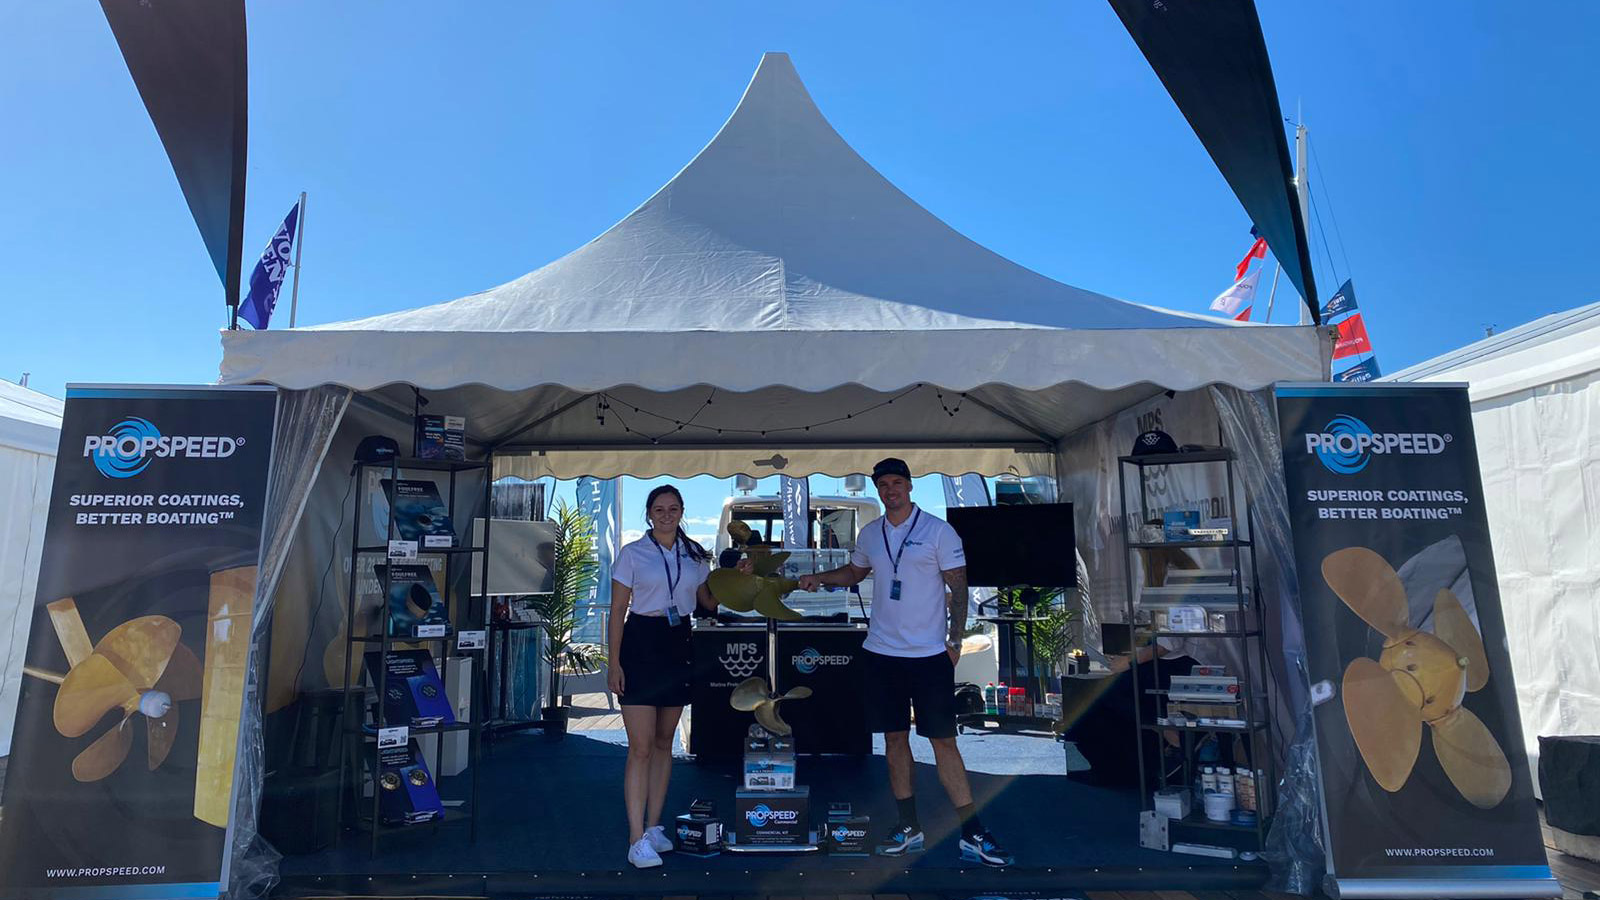 Propspeed at Sanctuary Cove International Boat Show 2021